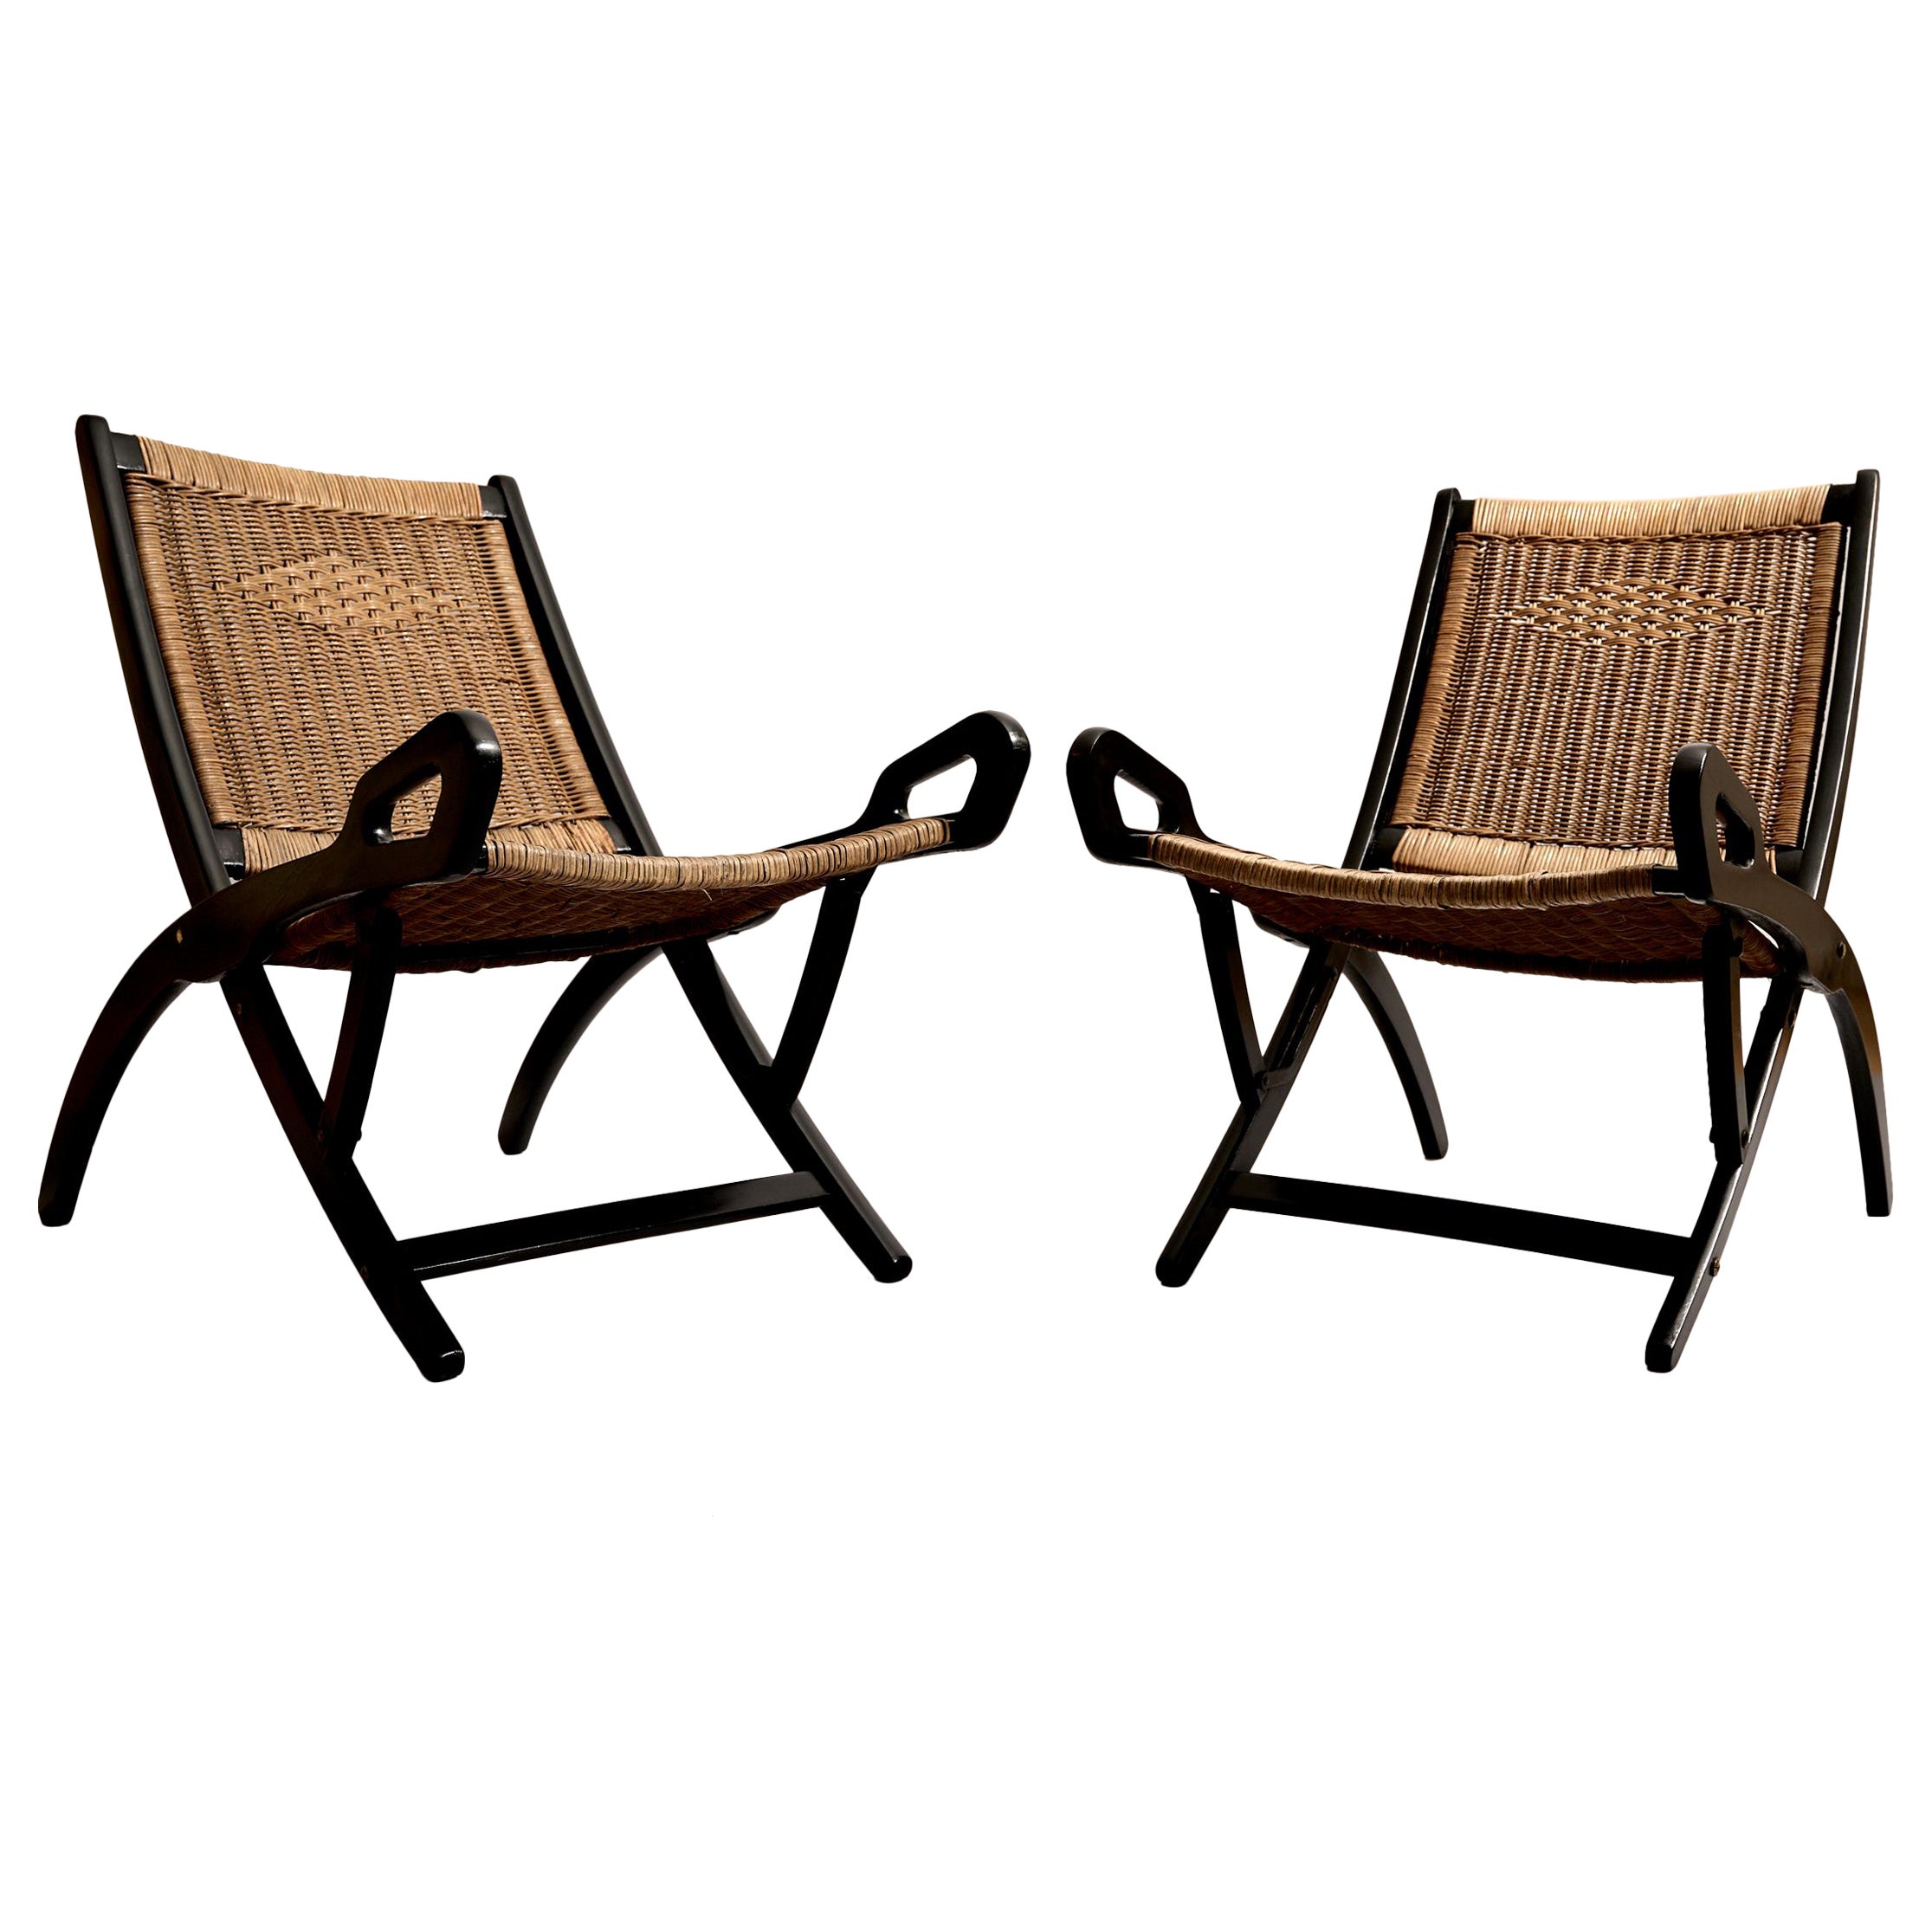 Pair of Gio Ponti, 'Ninfea' Folding Rattan Chairs for Fratelli Reguitti, c 1957 For Sale